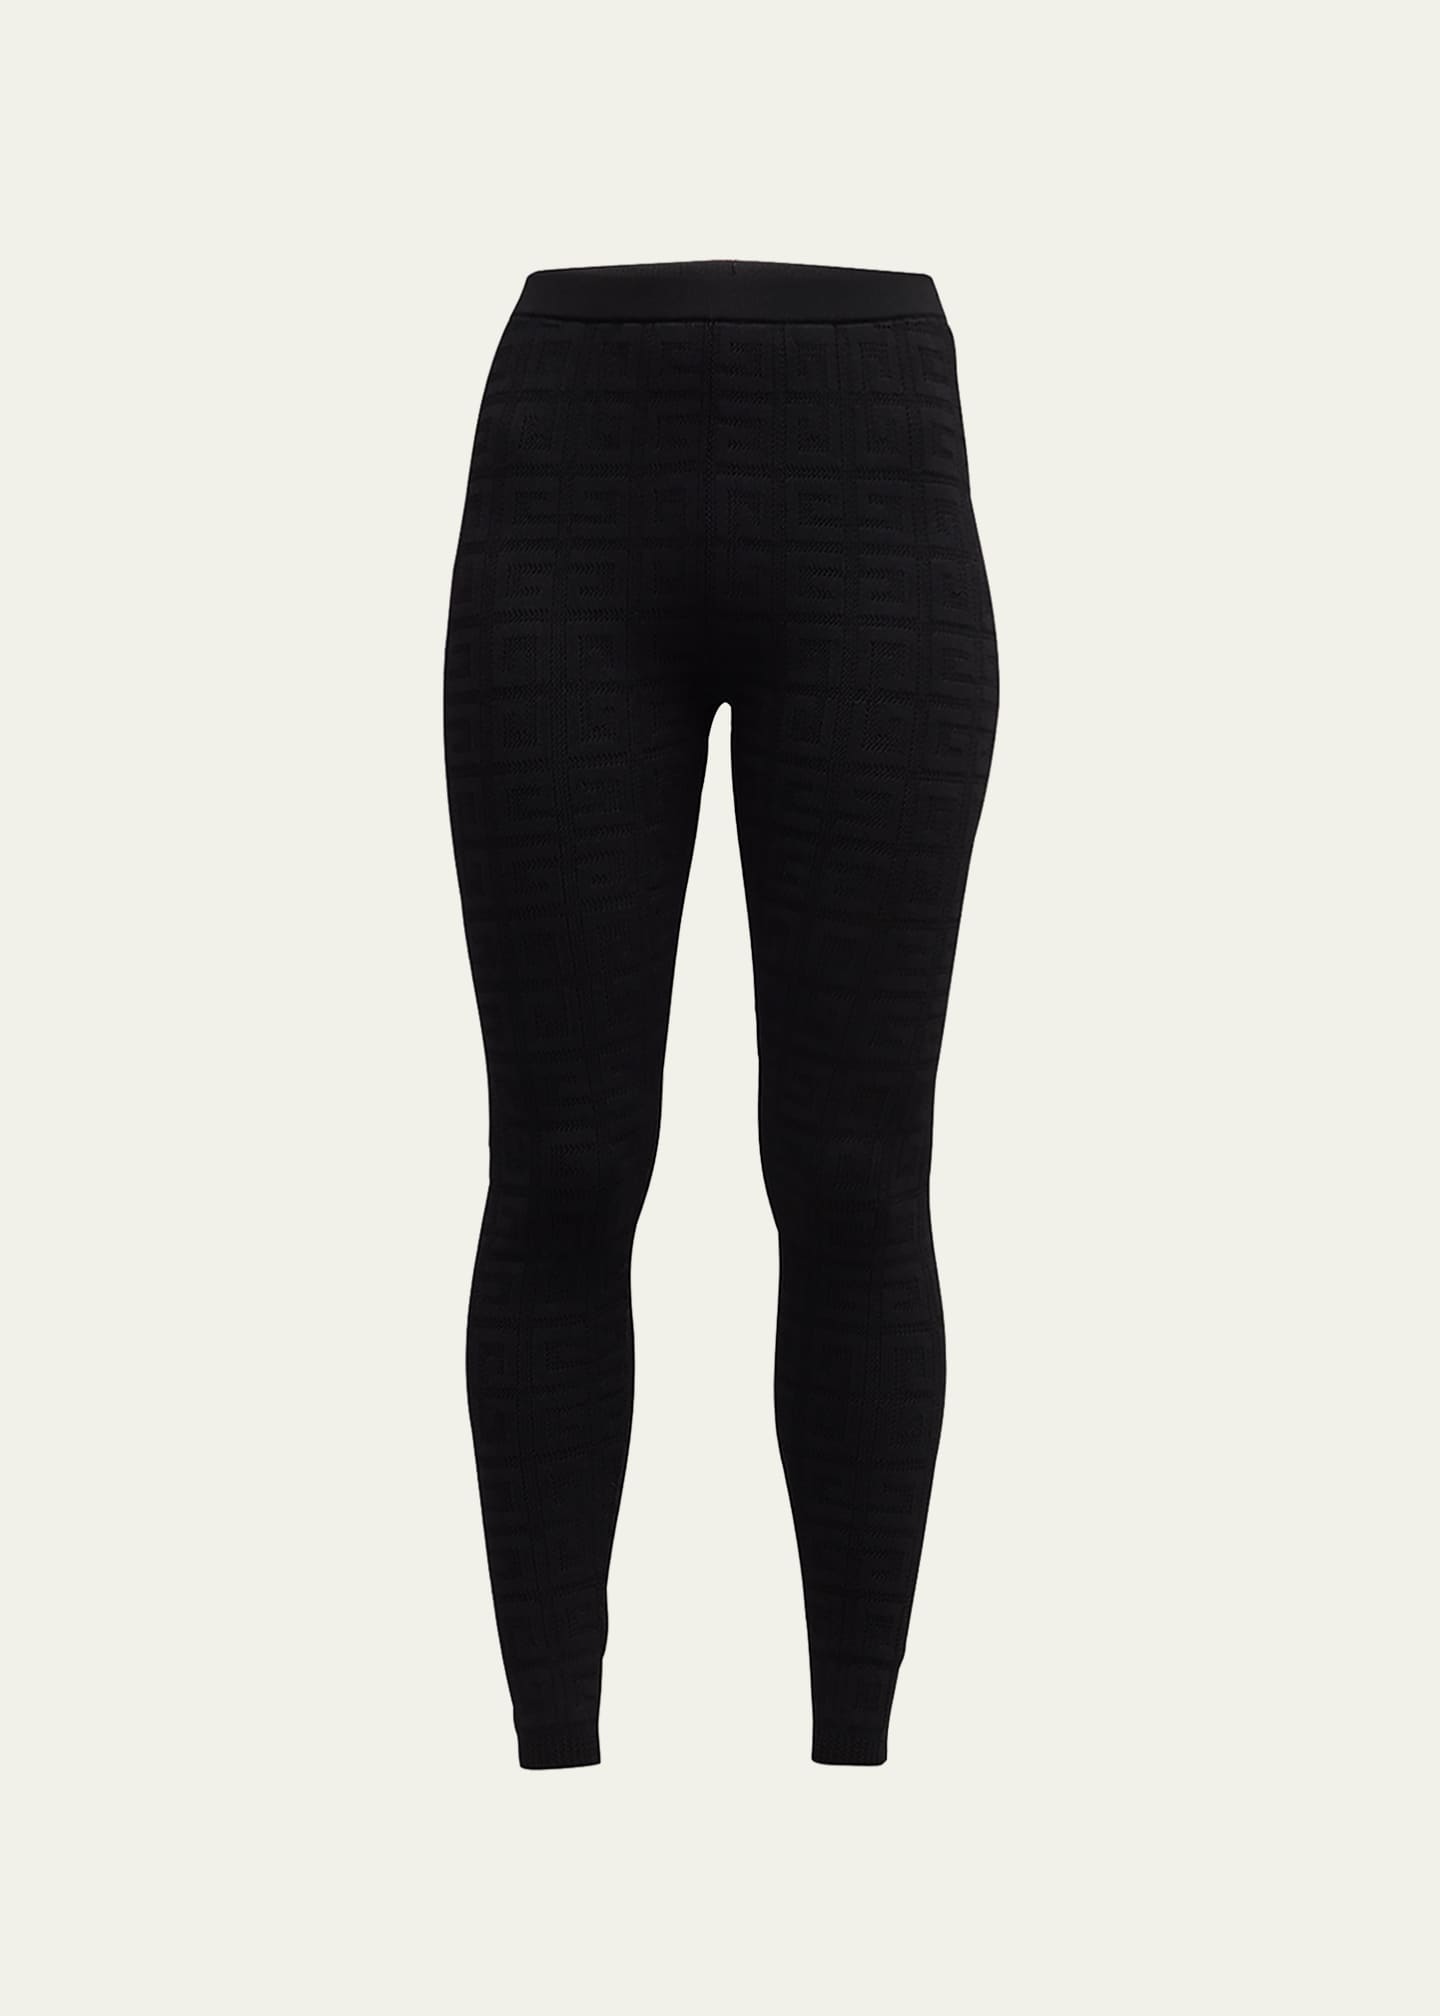 Givenchy Black Stretch High Waisted Knit Leggings Sz S(27)Authentic NEW w/  Tag